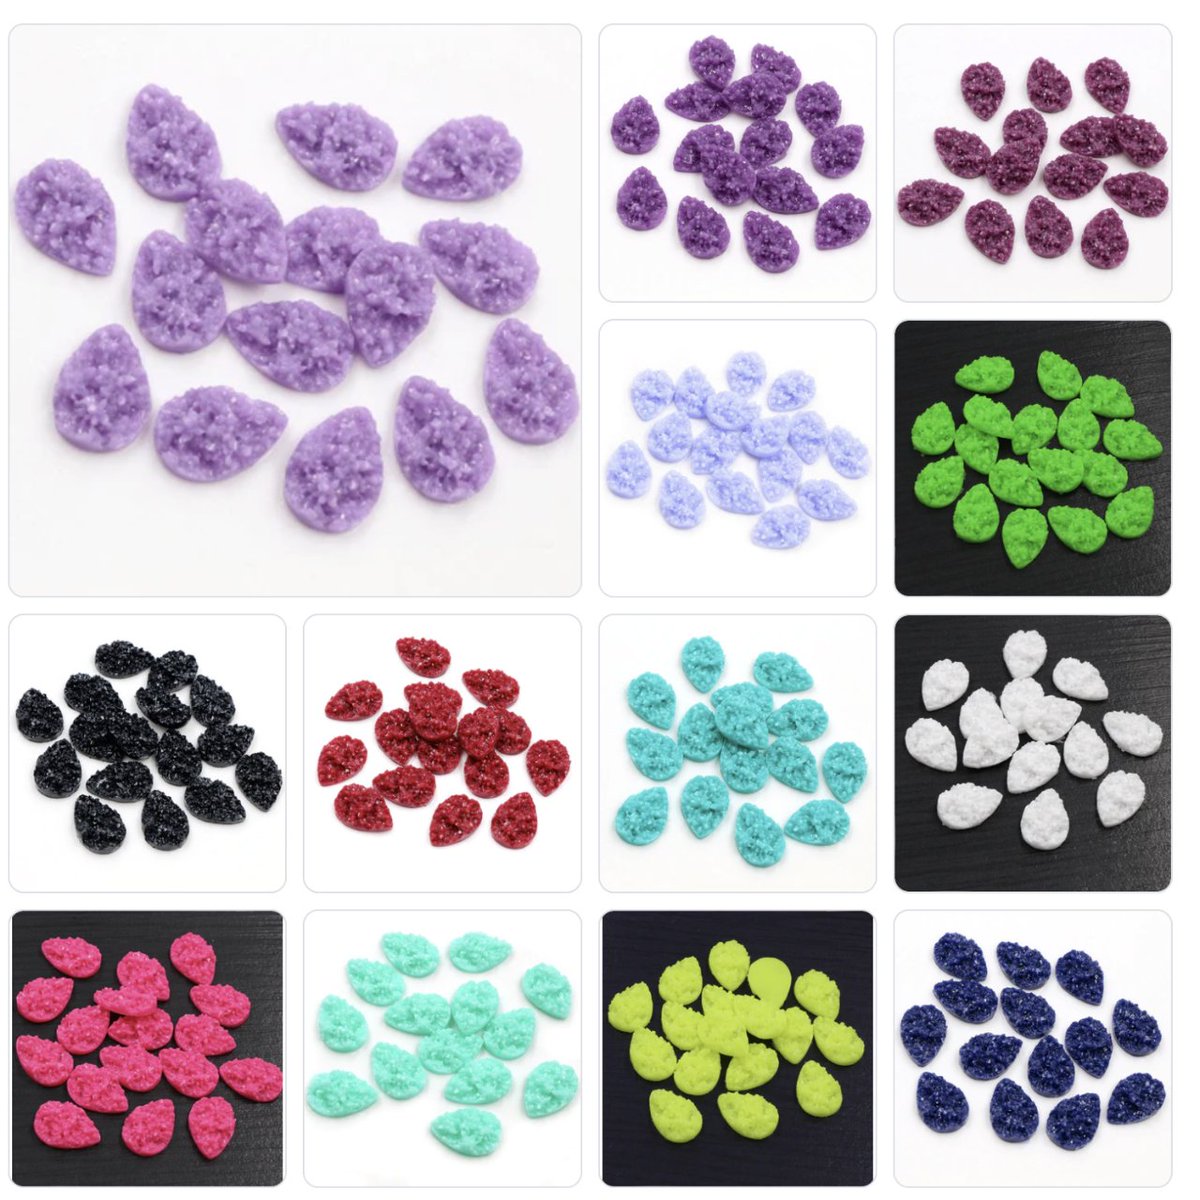 Sundaylace Creation & Bling bead store caters to the Indigenous beading community with a large selection of resin gems/cabochons to create beadwork art. 

mtr.cool/ptlrqmjbox

 #beading #nativebeadwork #beadedearrings #beadsupplystore  #beadingsupplies #beads #beadwork